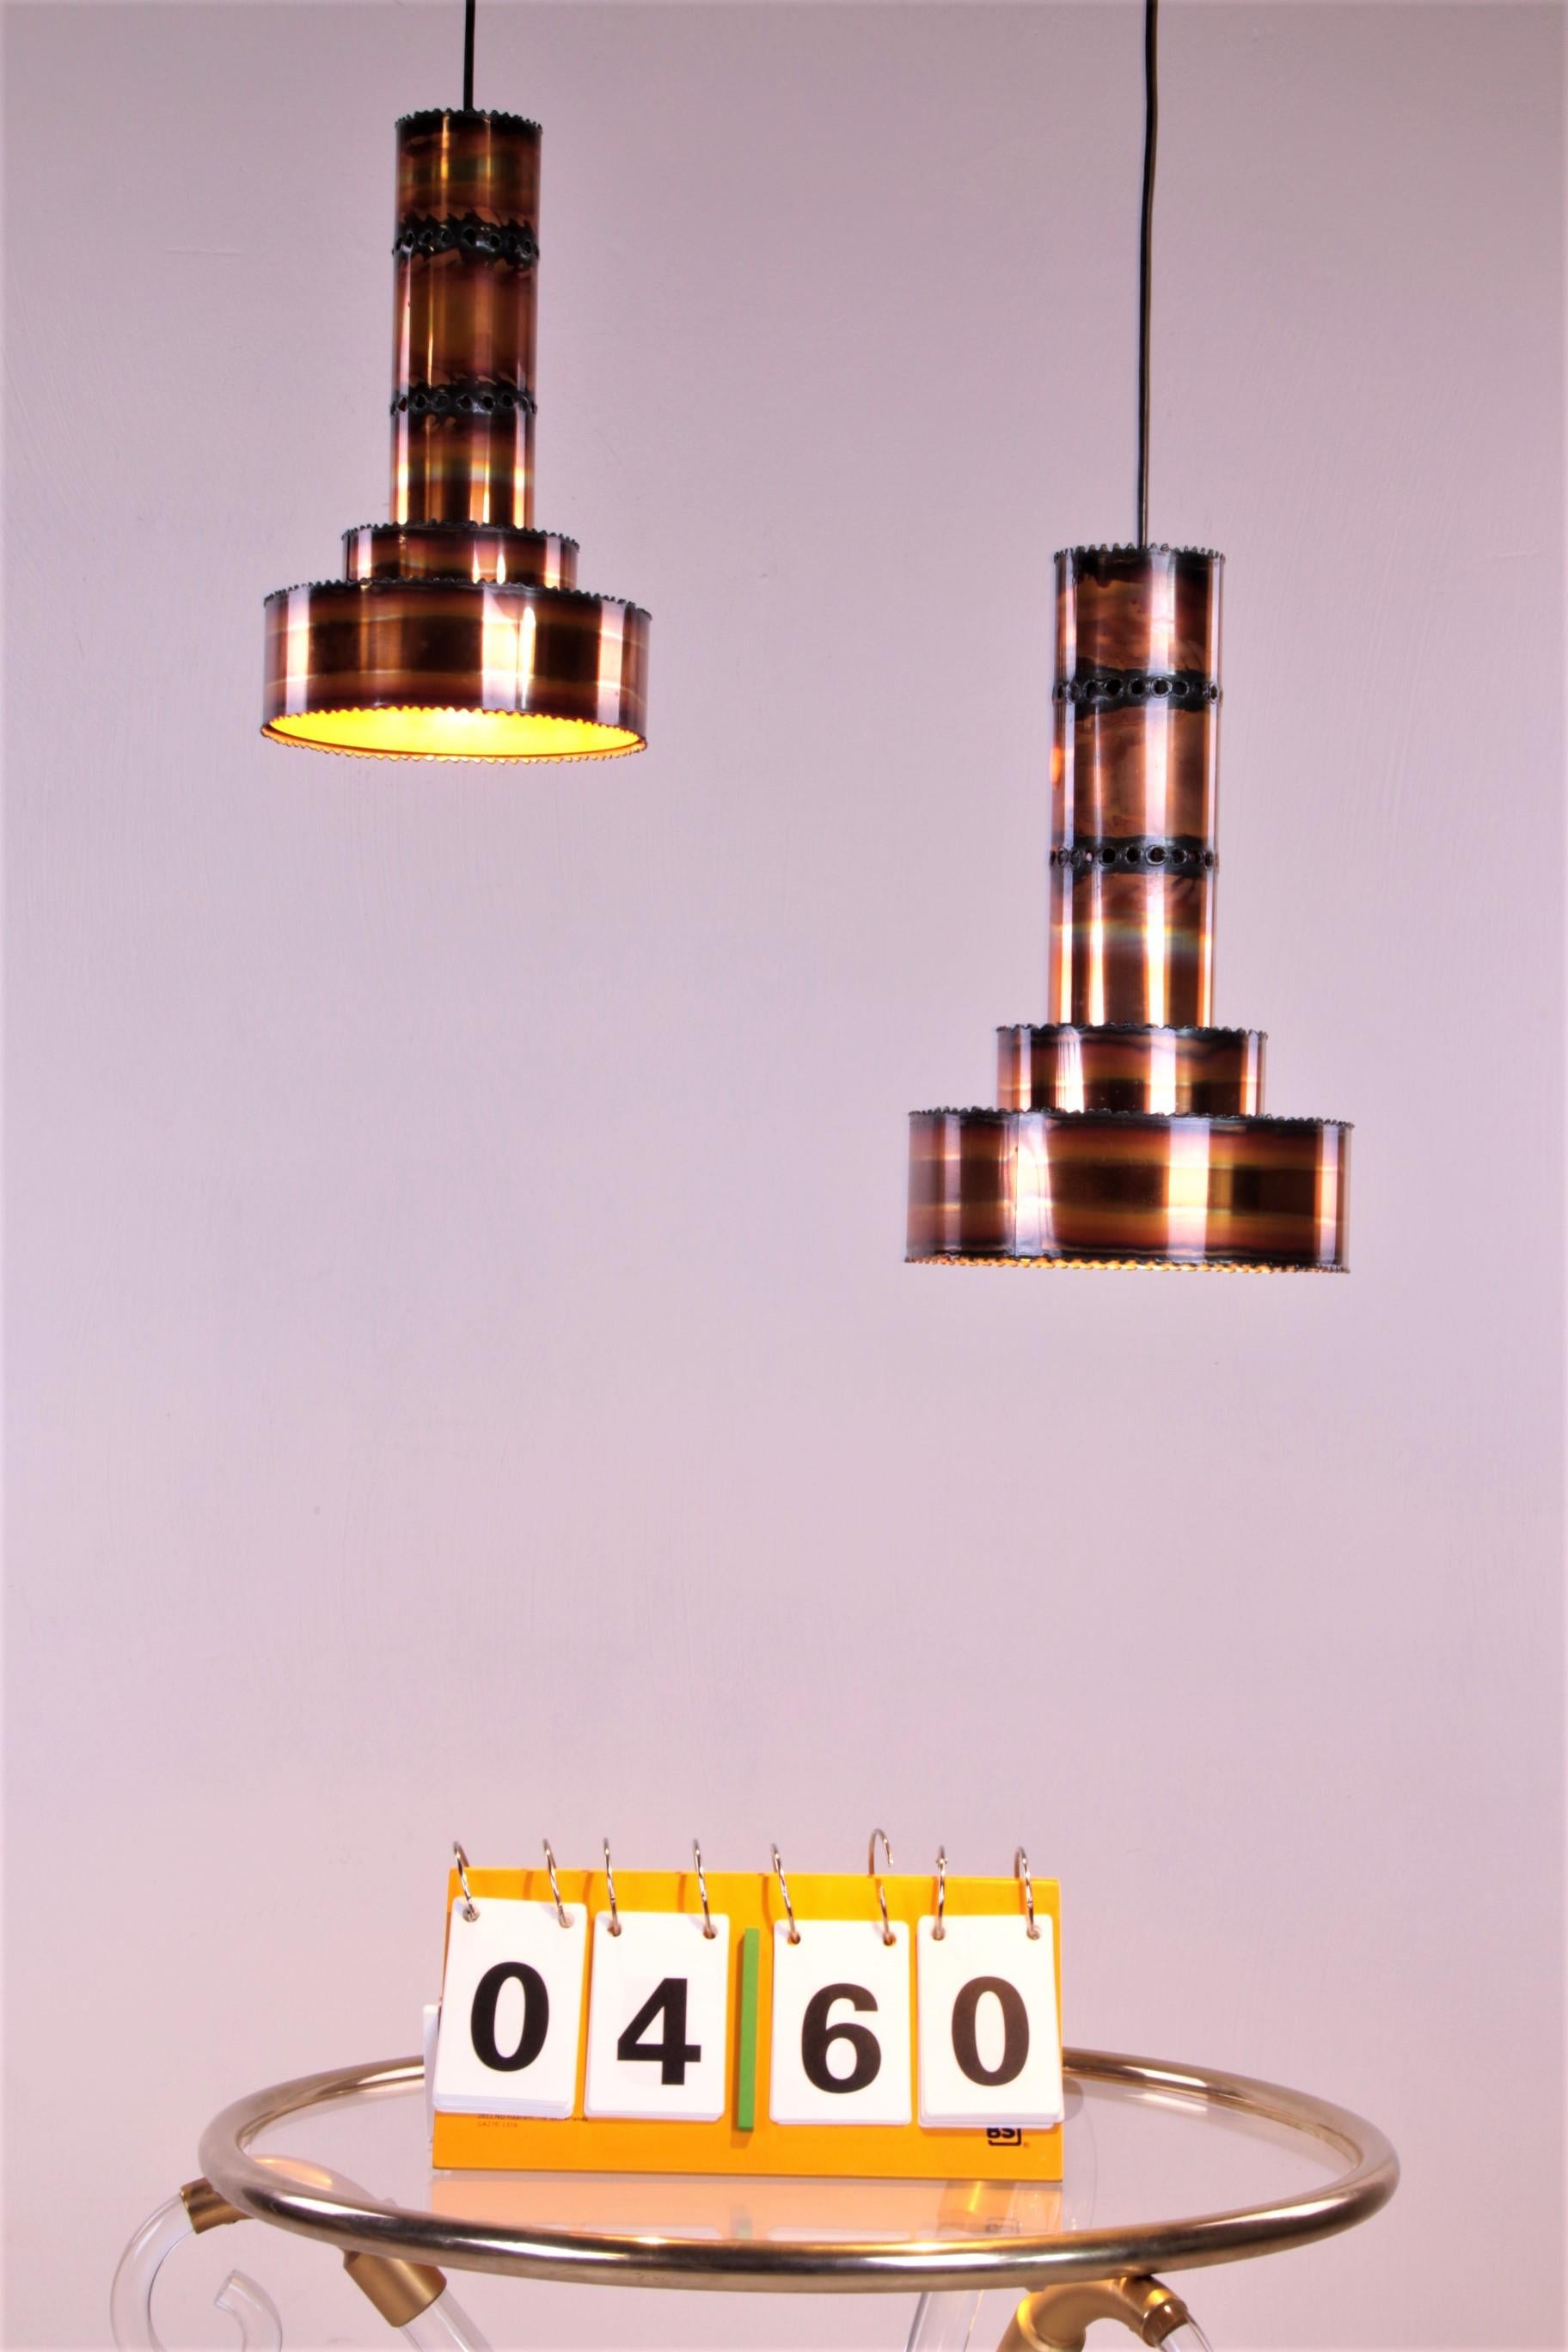 A beautiful set of two brutalist pendant lamps, 

designed by the Danish designer Svend Aage Holm-Sørensen.

He was known for the lamps he created for well-known 
Danish furniture companies and later for his own brand in the 1950s:
Holm